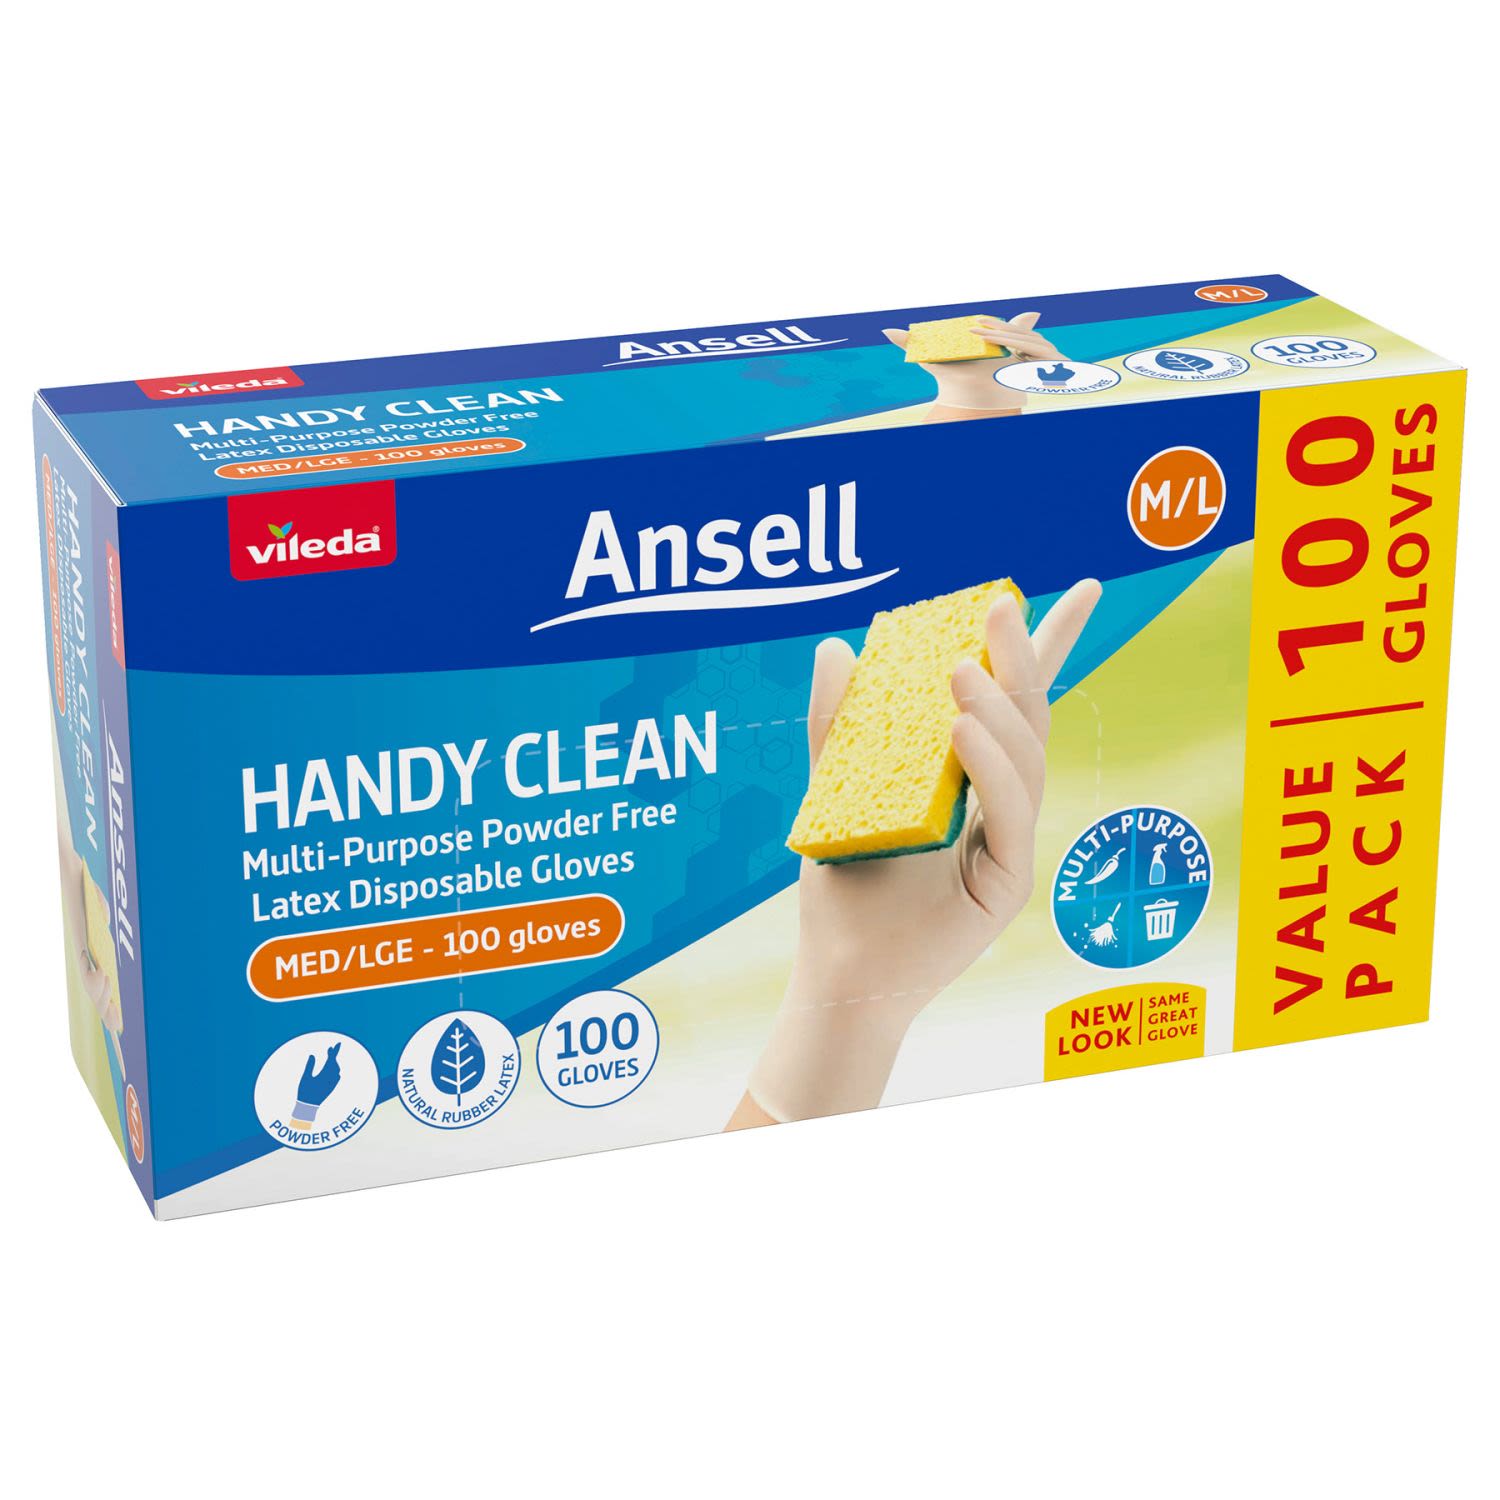 Ansell Healthcare Disposable Handy Clean Glove Pack 50pk 